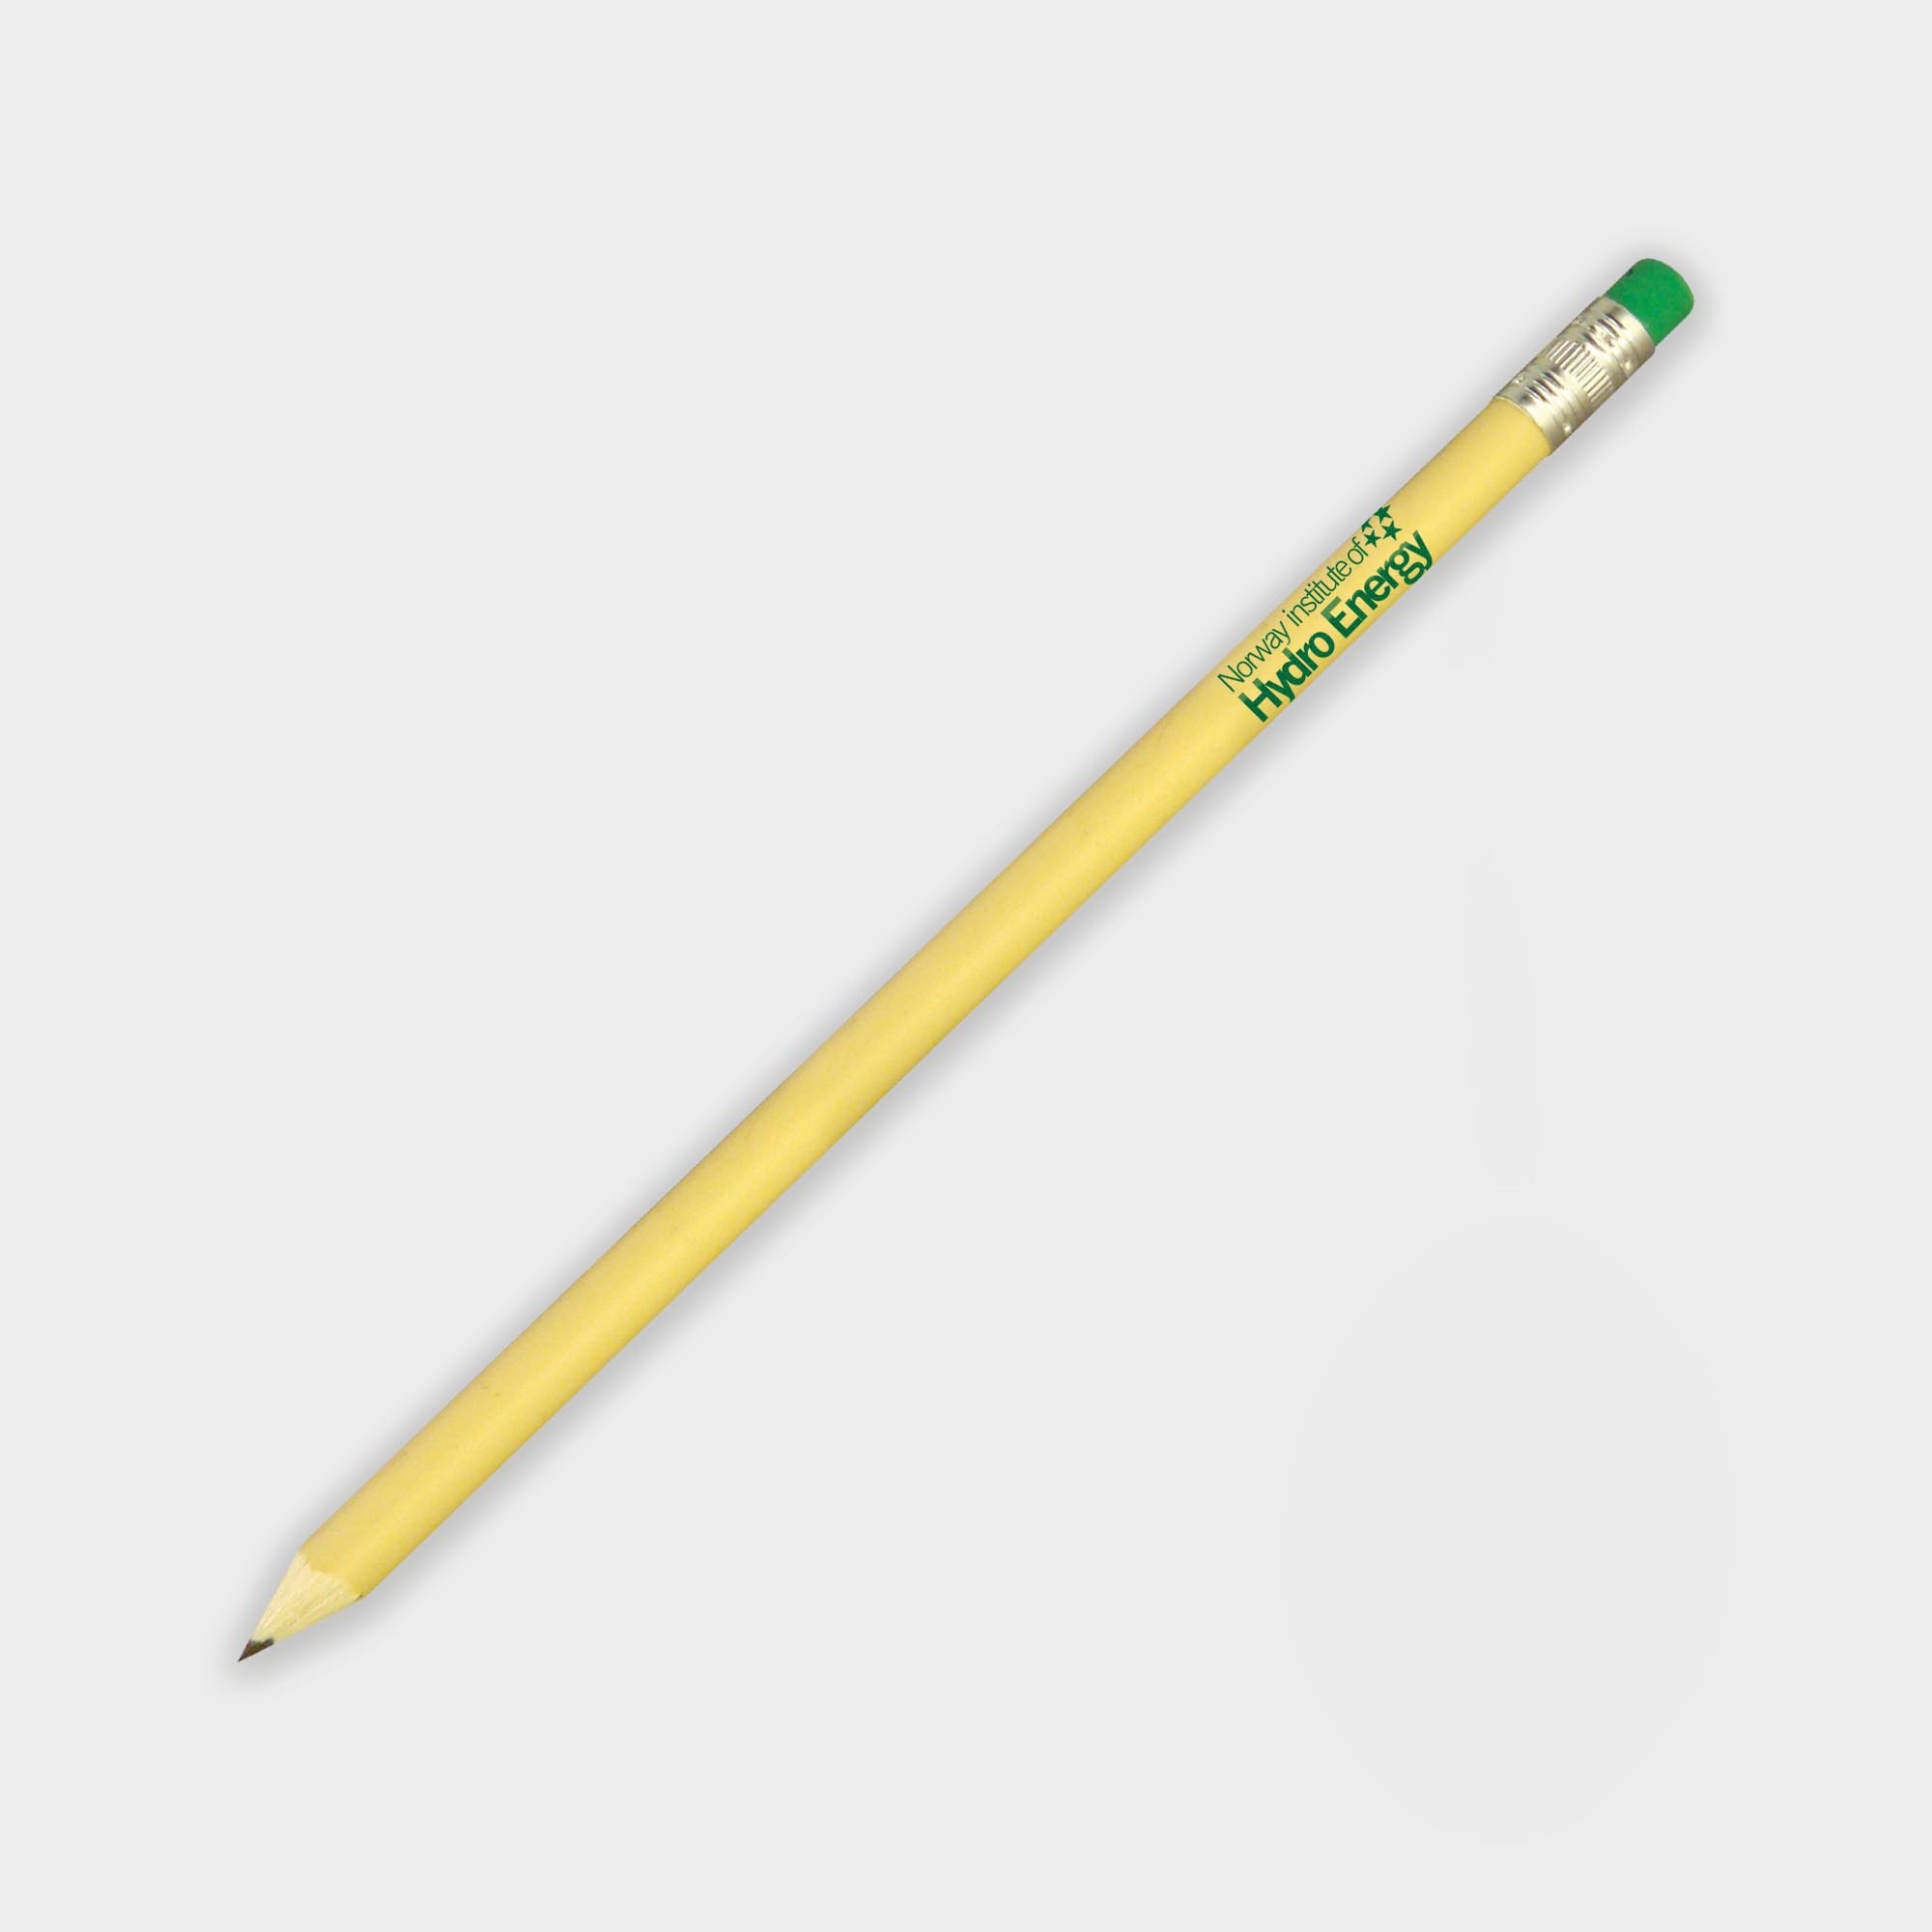 Promotional Recycled Lunchtray Pencil